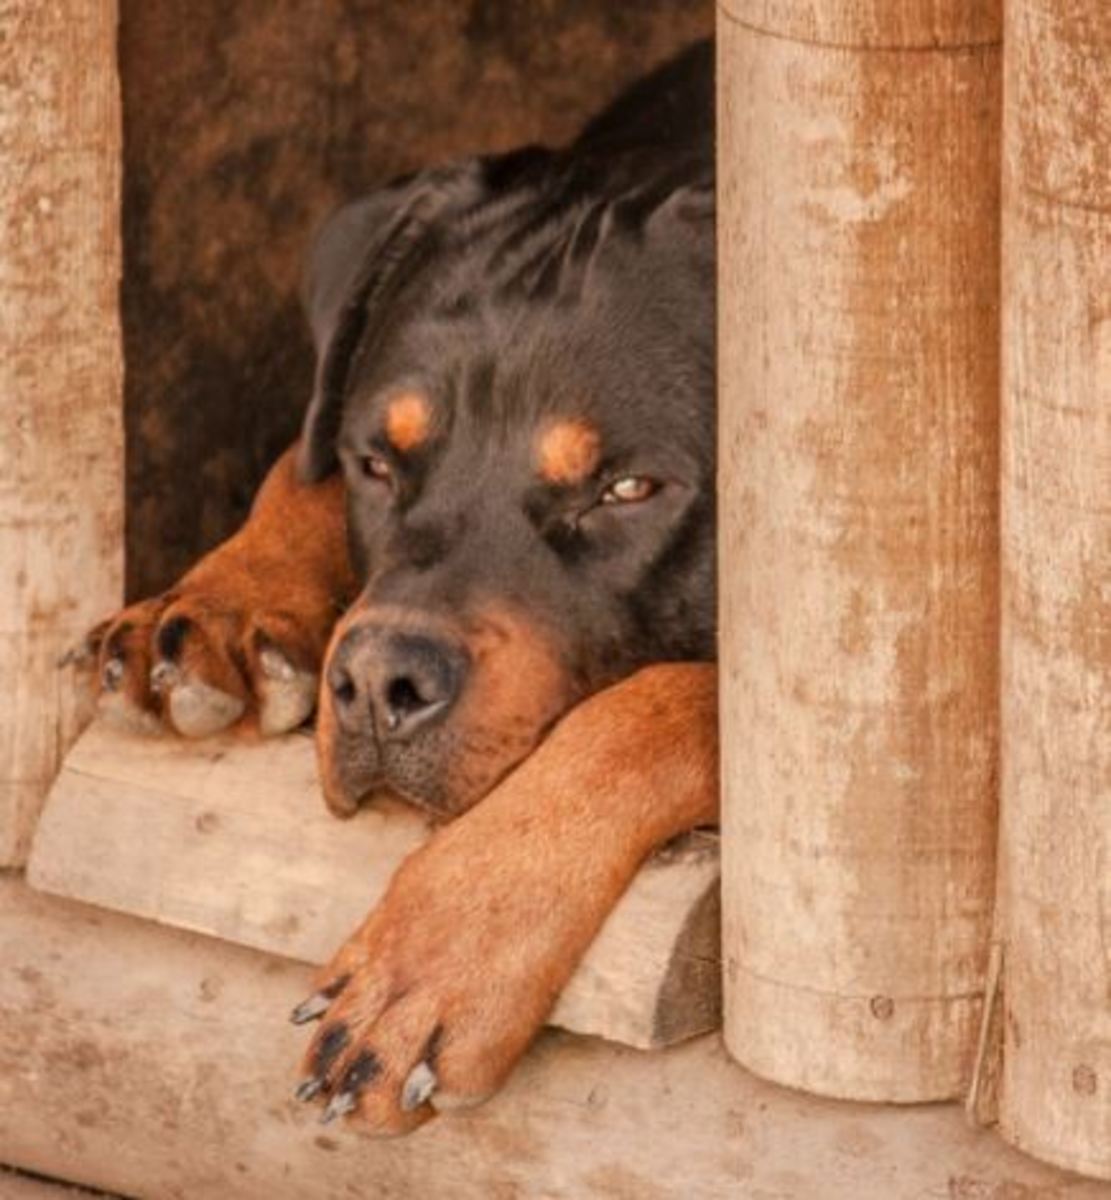 Osteosarcoma in dogs affects Rottweilers among other breeds.